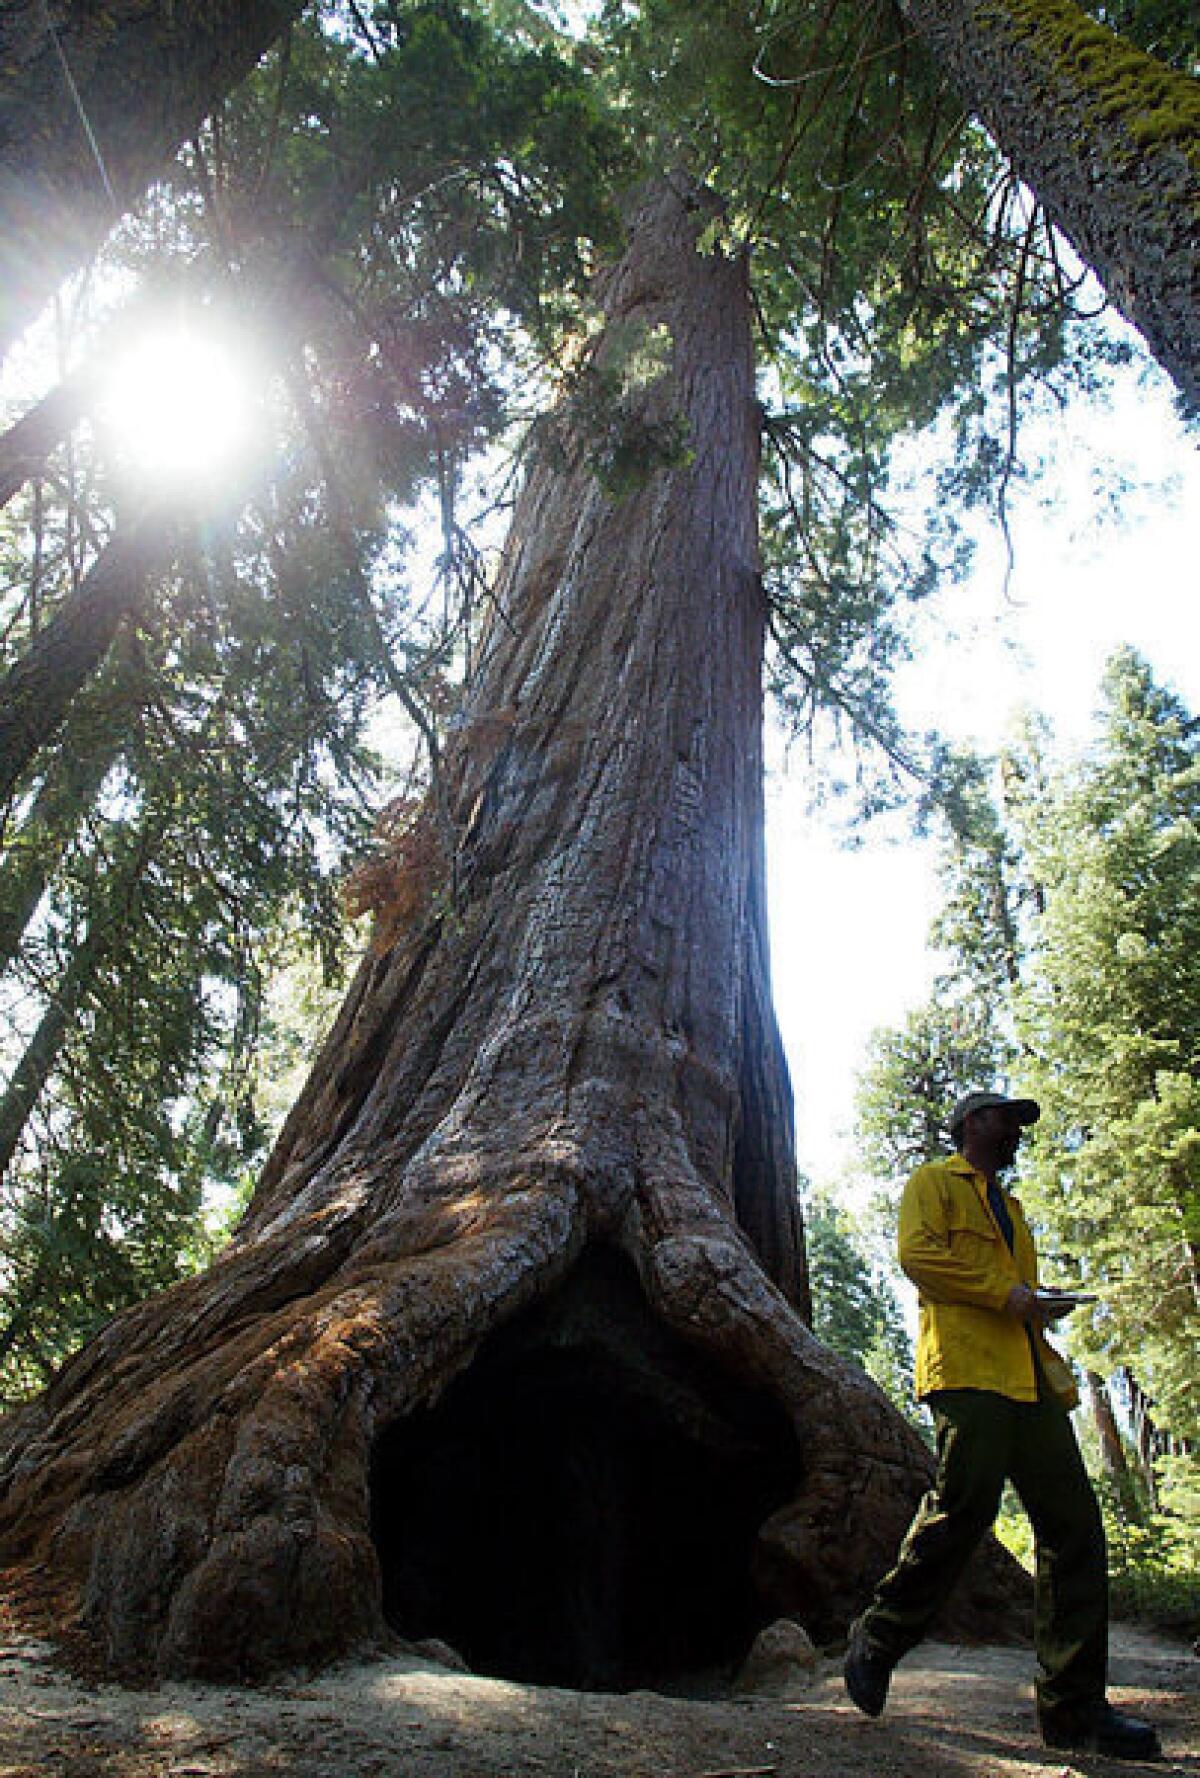 Giant sequoias grow in the wild only on the western slopes of the Sierra Nevada. This 2,000-year-old tree is part of the Trail of 100 Giants in the Giant Sequoia National Monument.